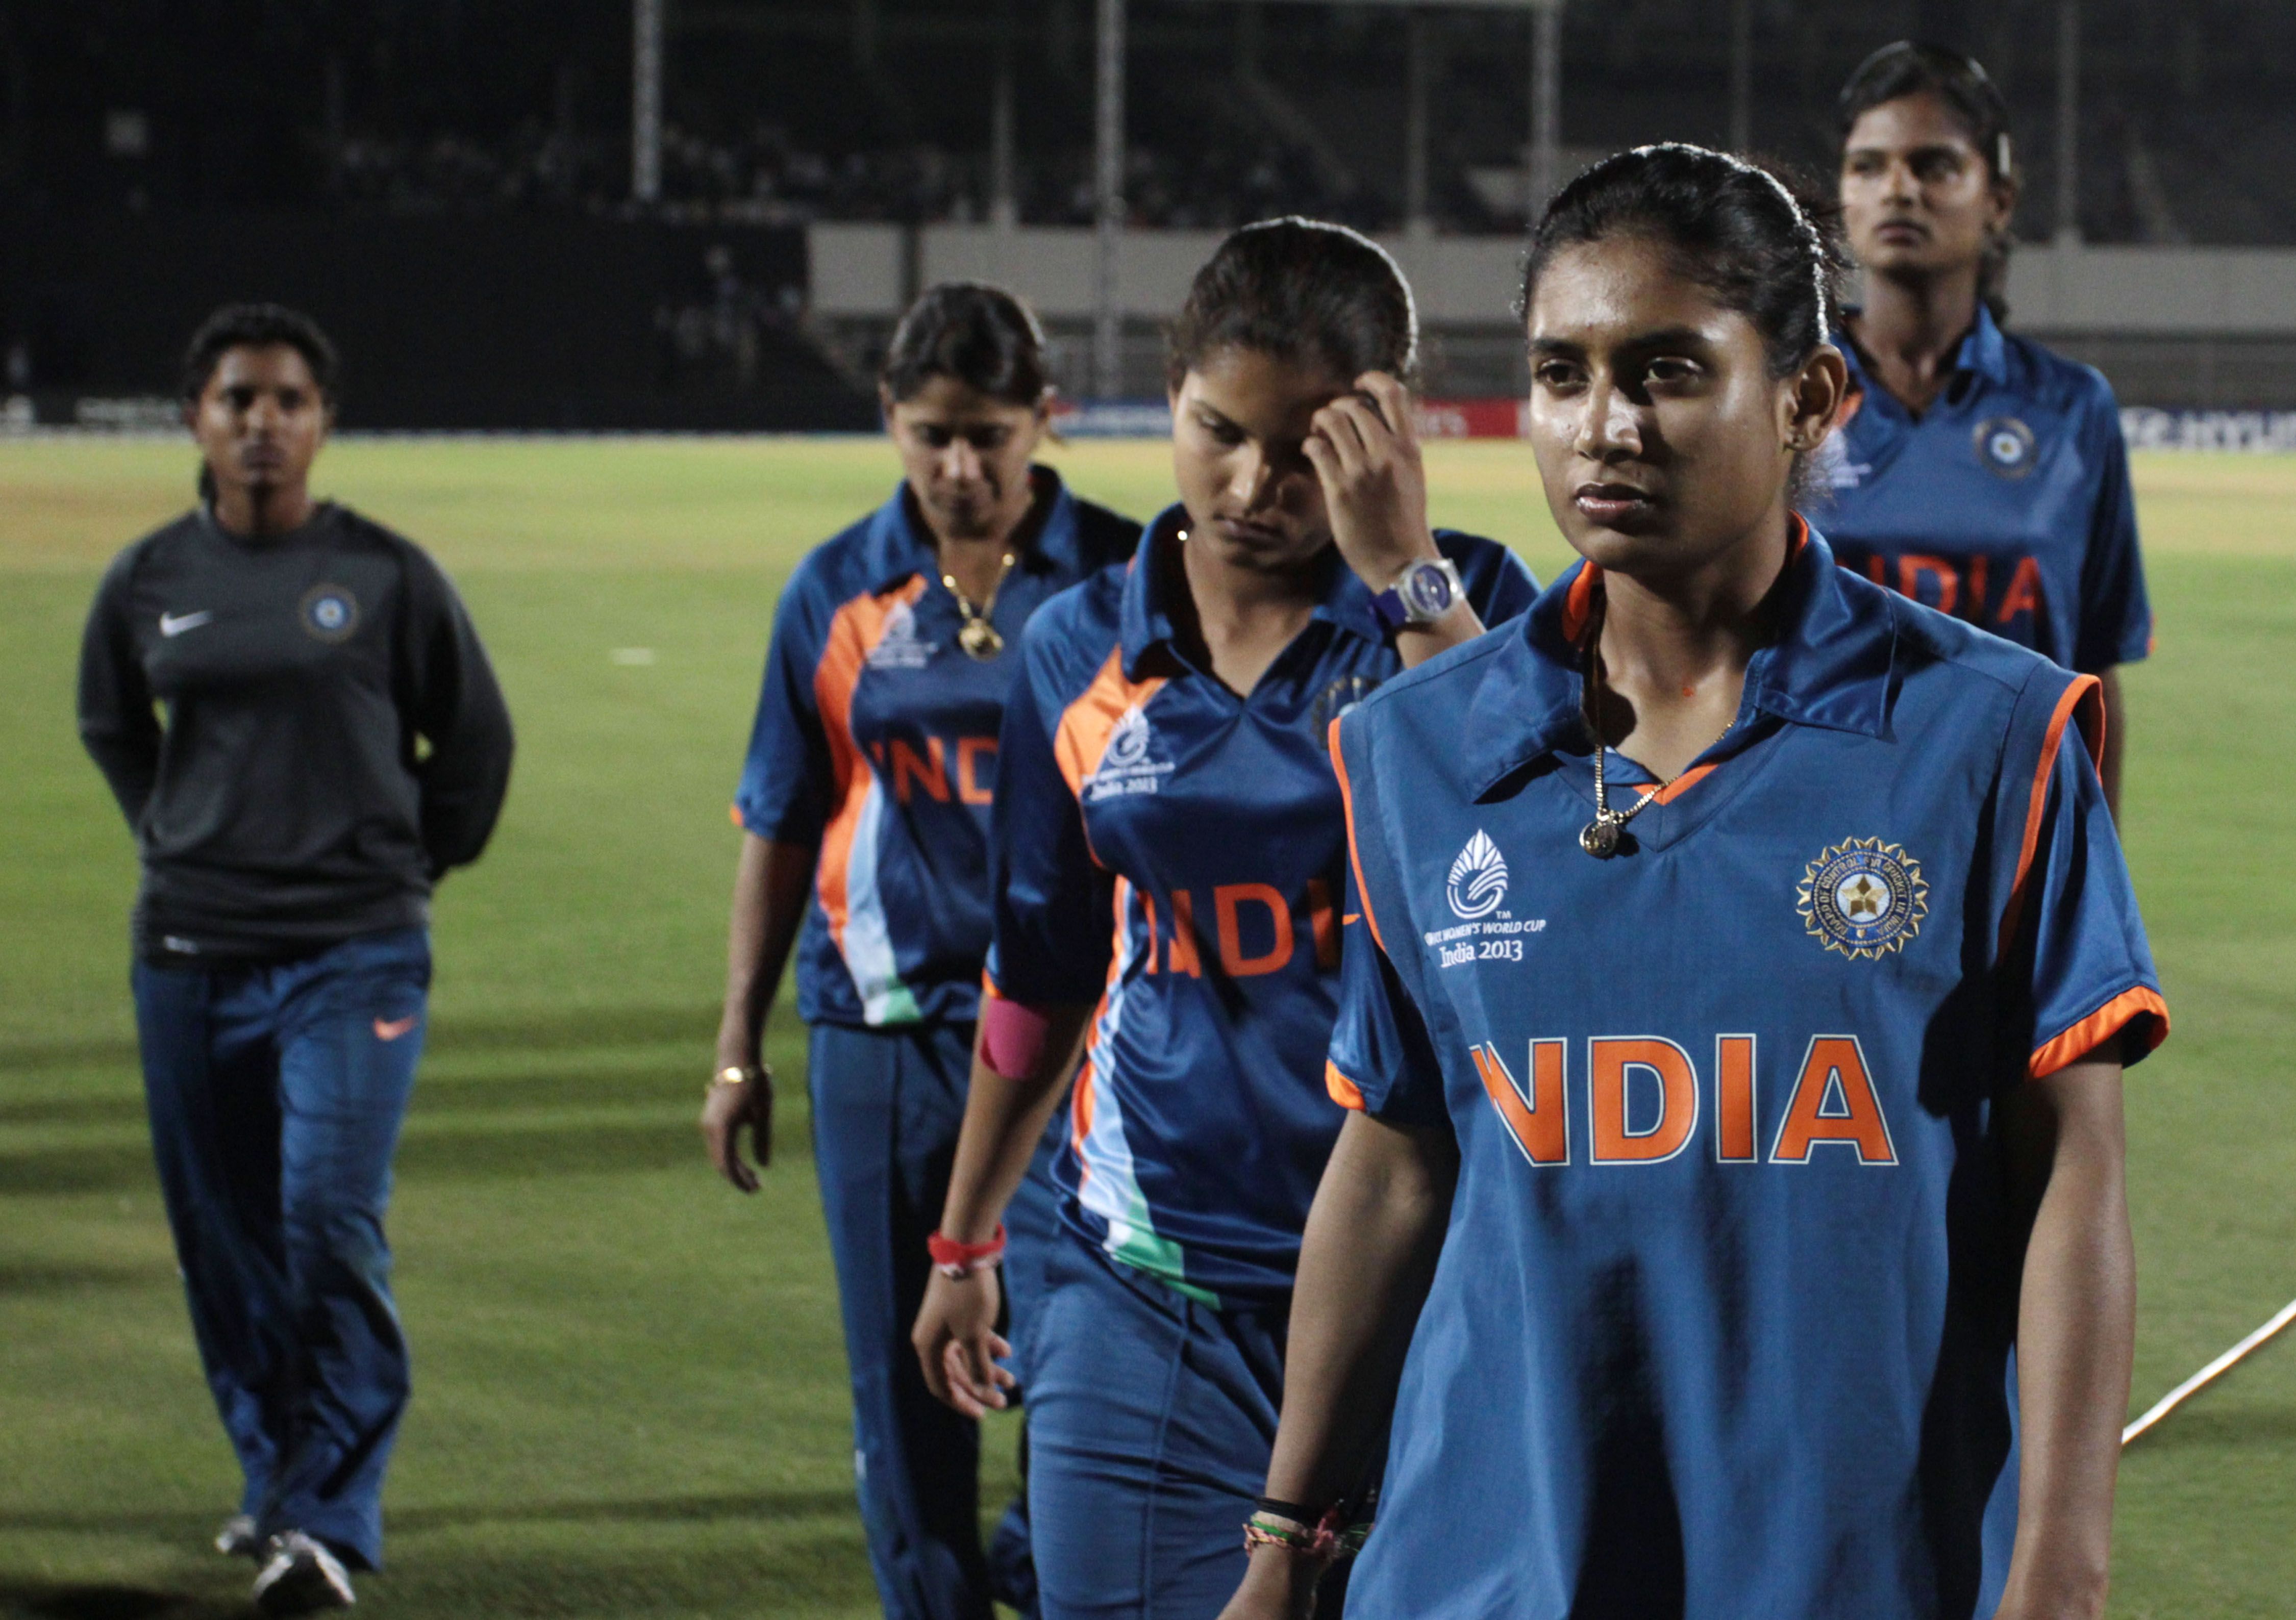 Mithali Raj captain of India, after losing the match